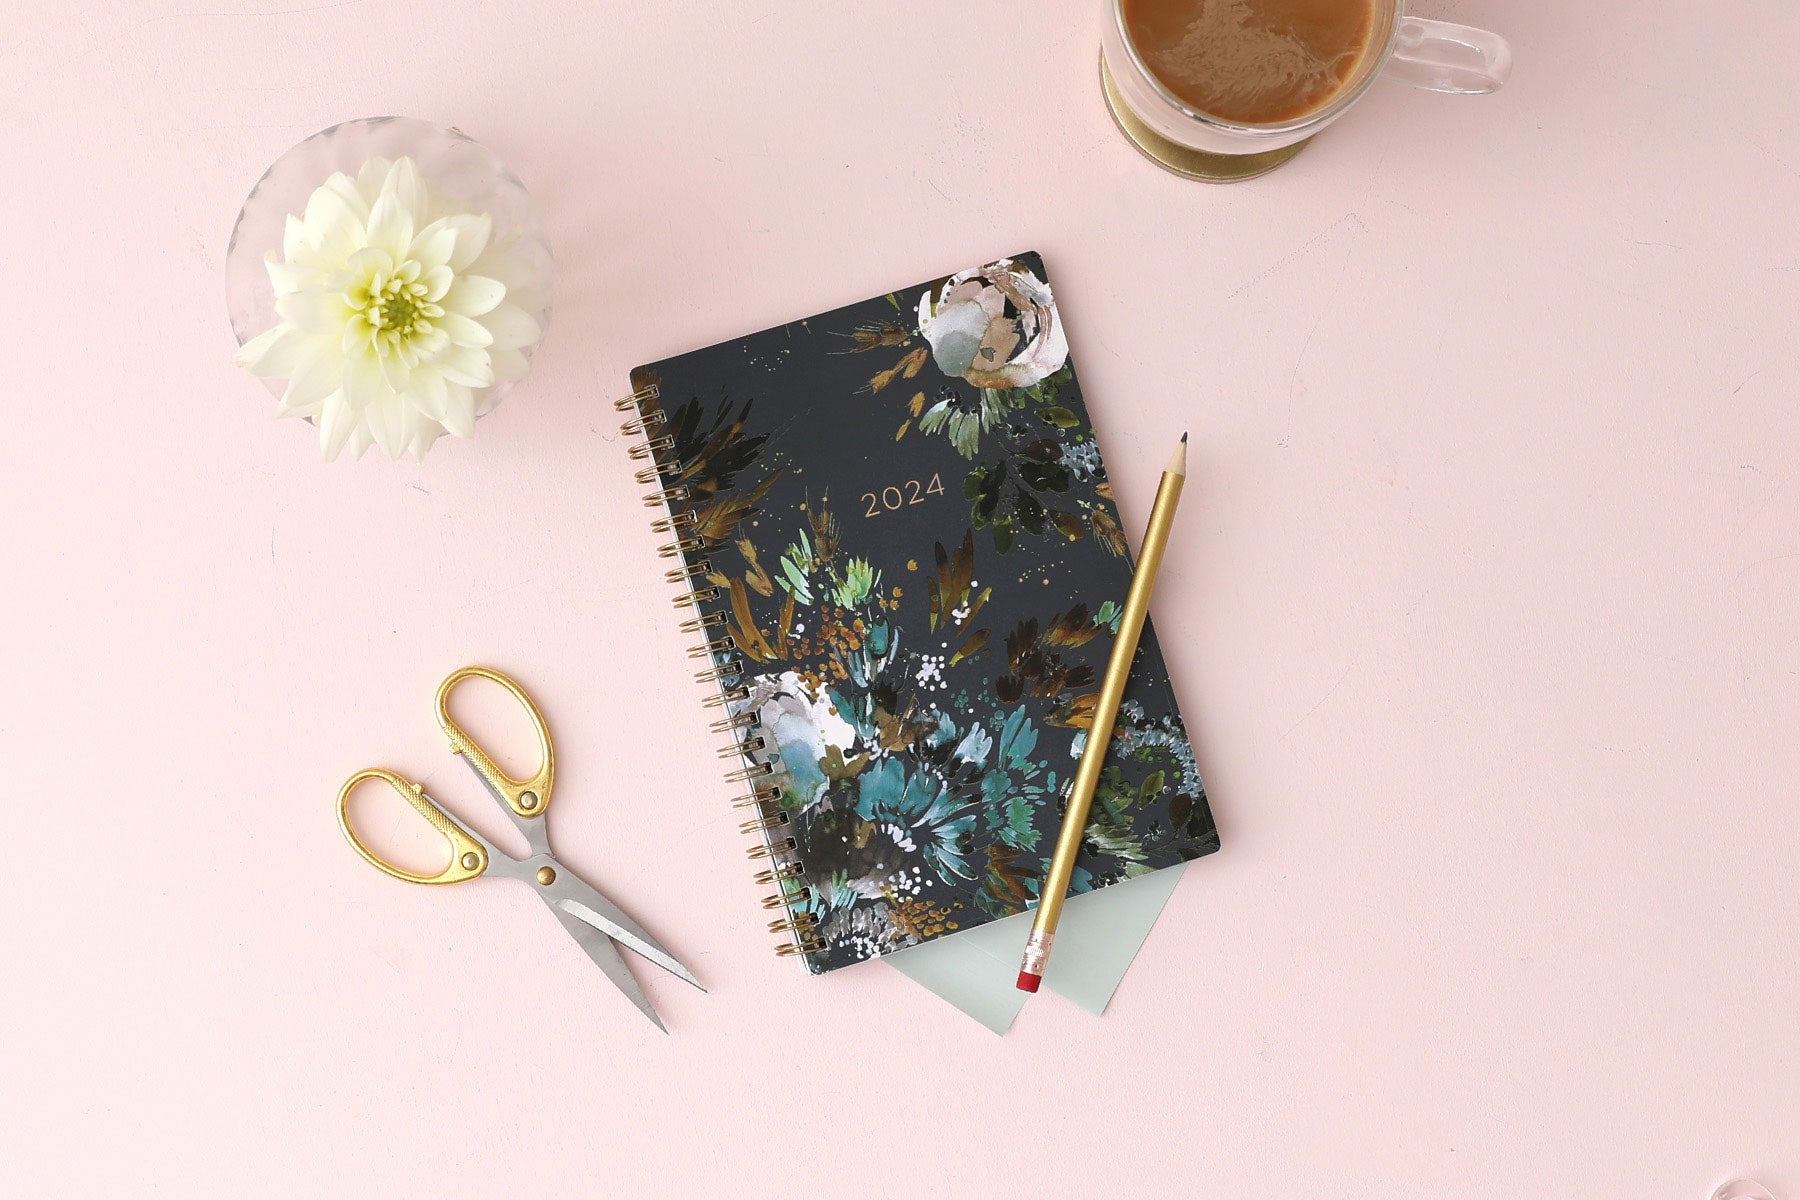 The kelly ventura 2024 weekly monthly planner for blue sky features beautiful watercolored floral cover with gold twin wire-o binding in a 5x8 planner size.